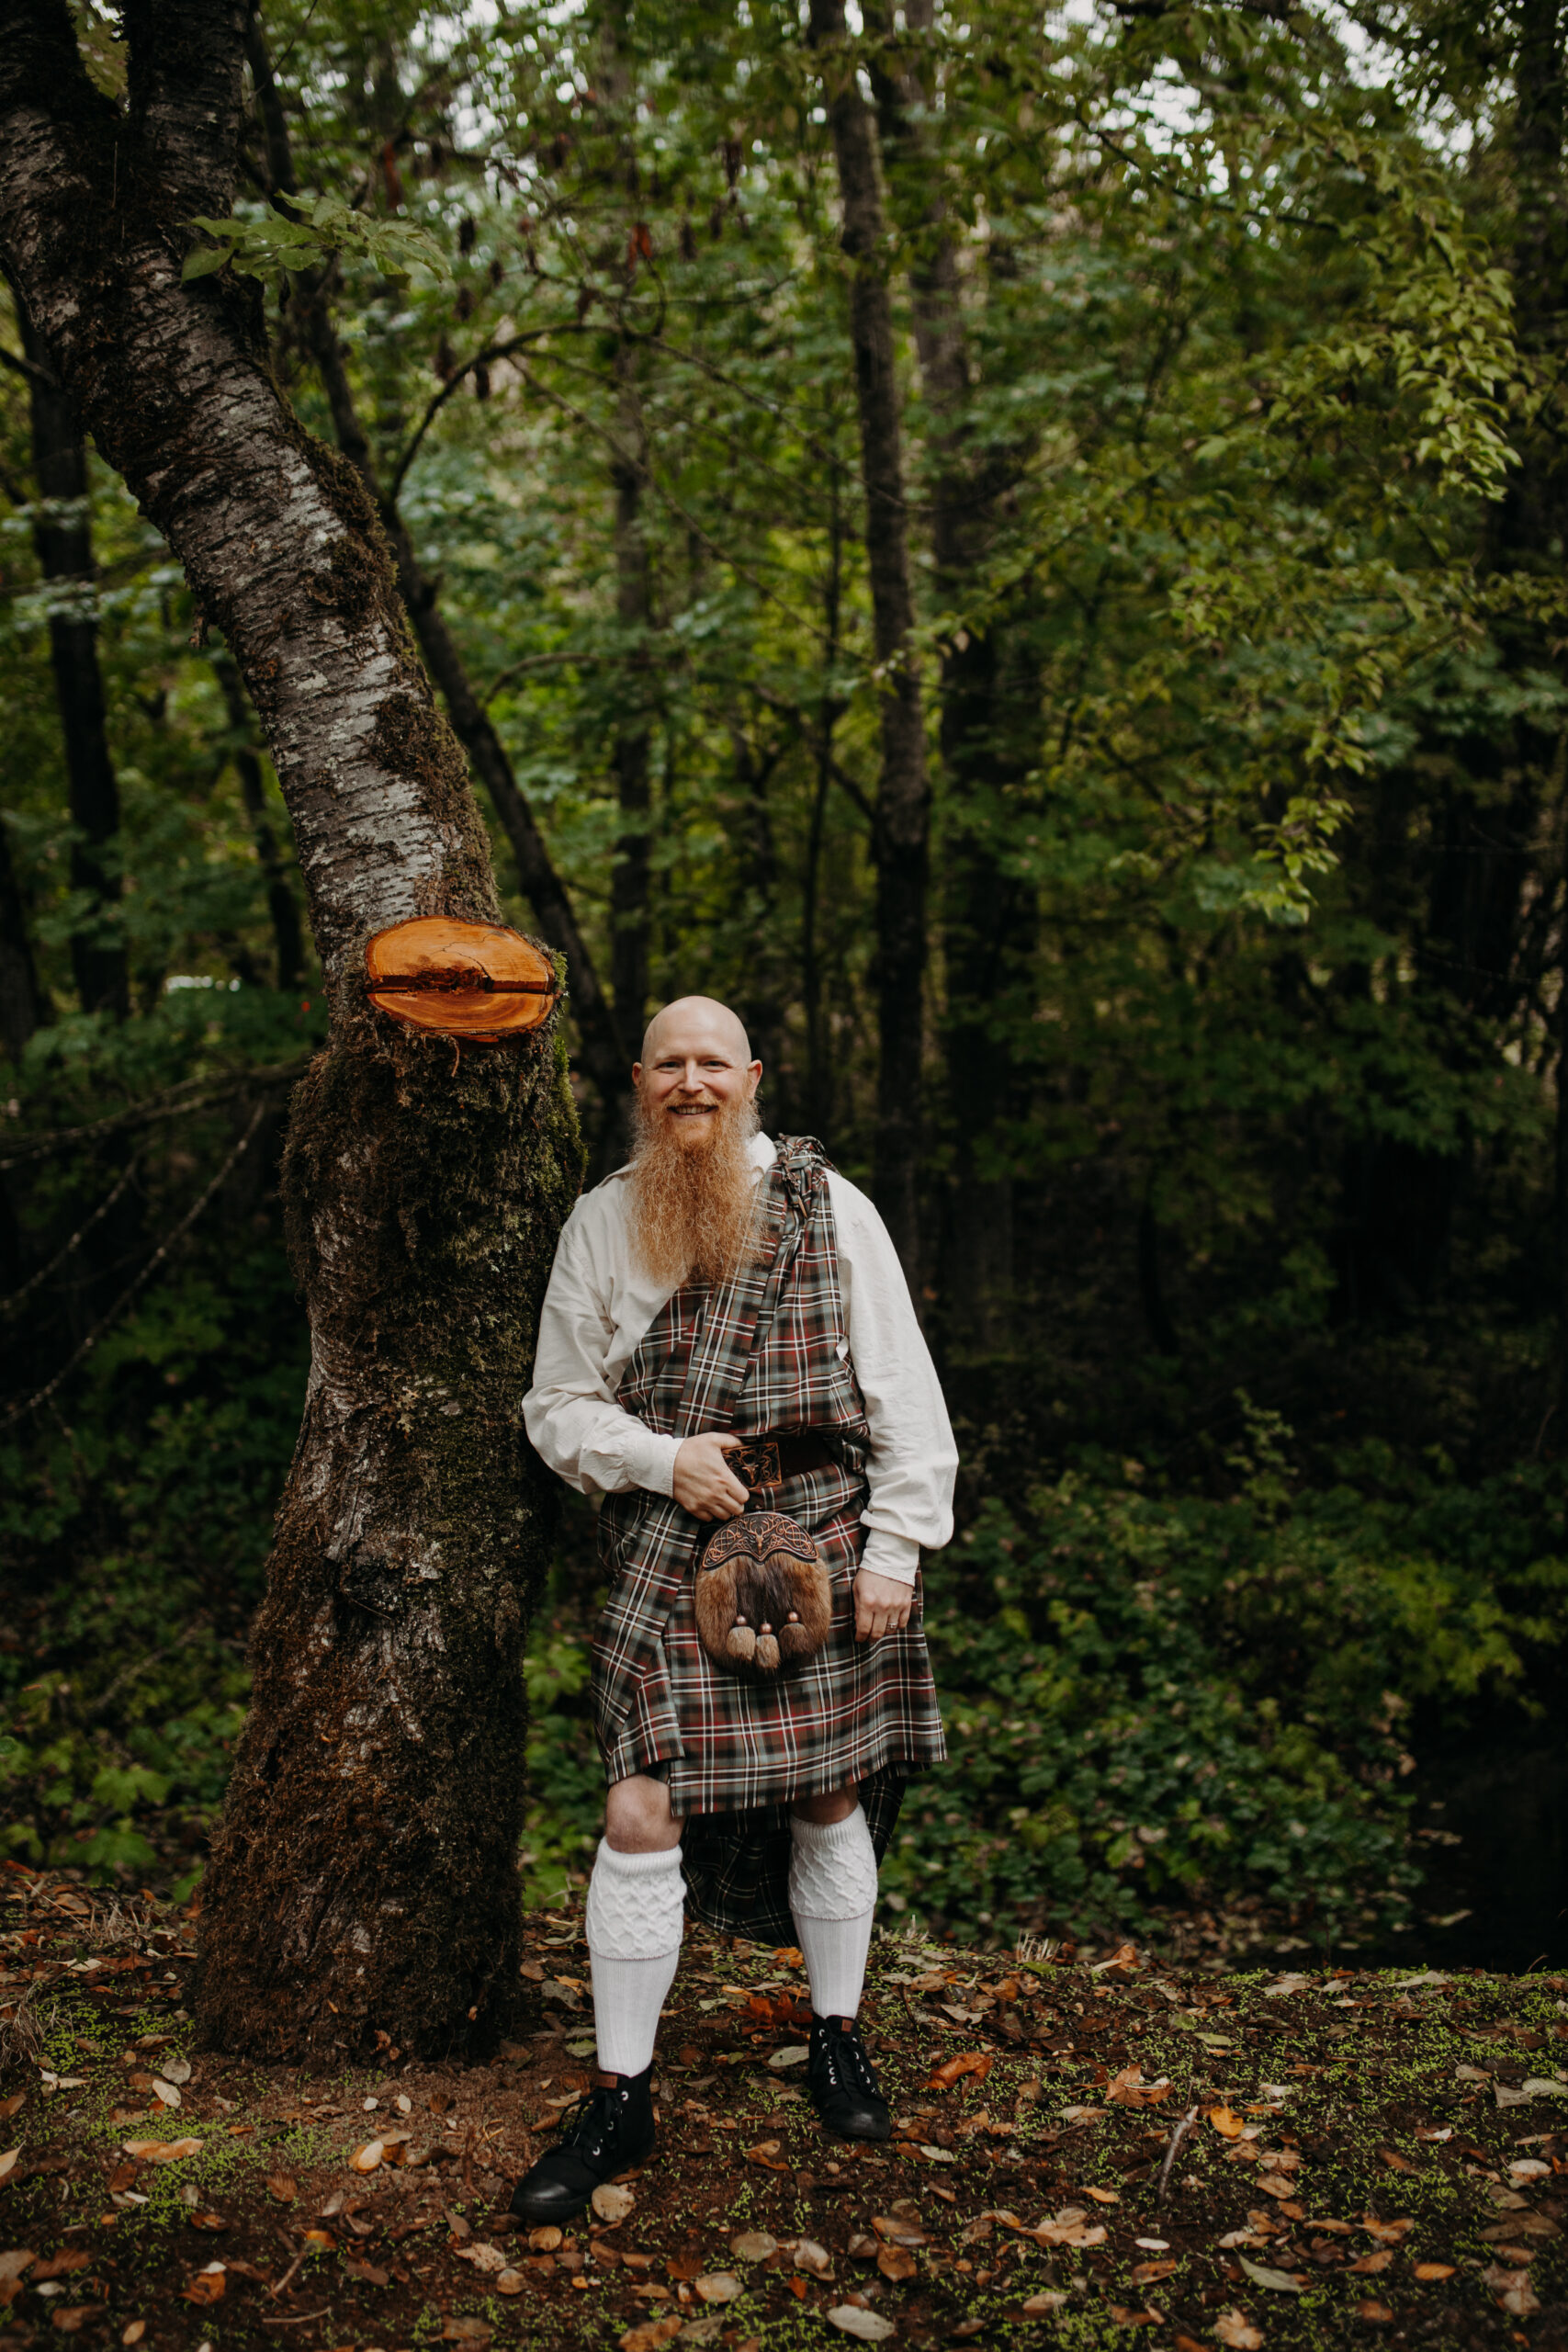 man in kilt leans against tree in a forest